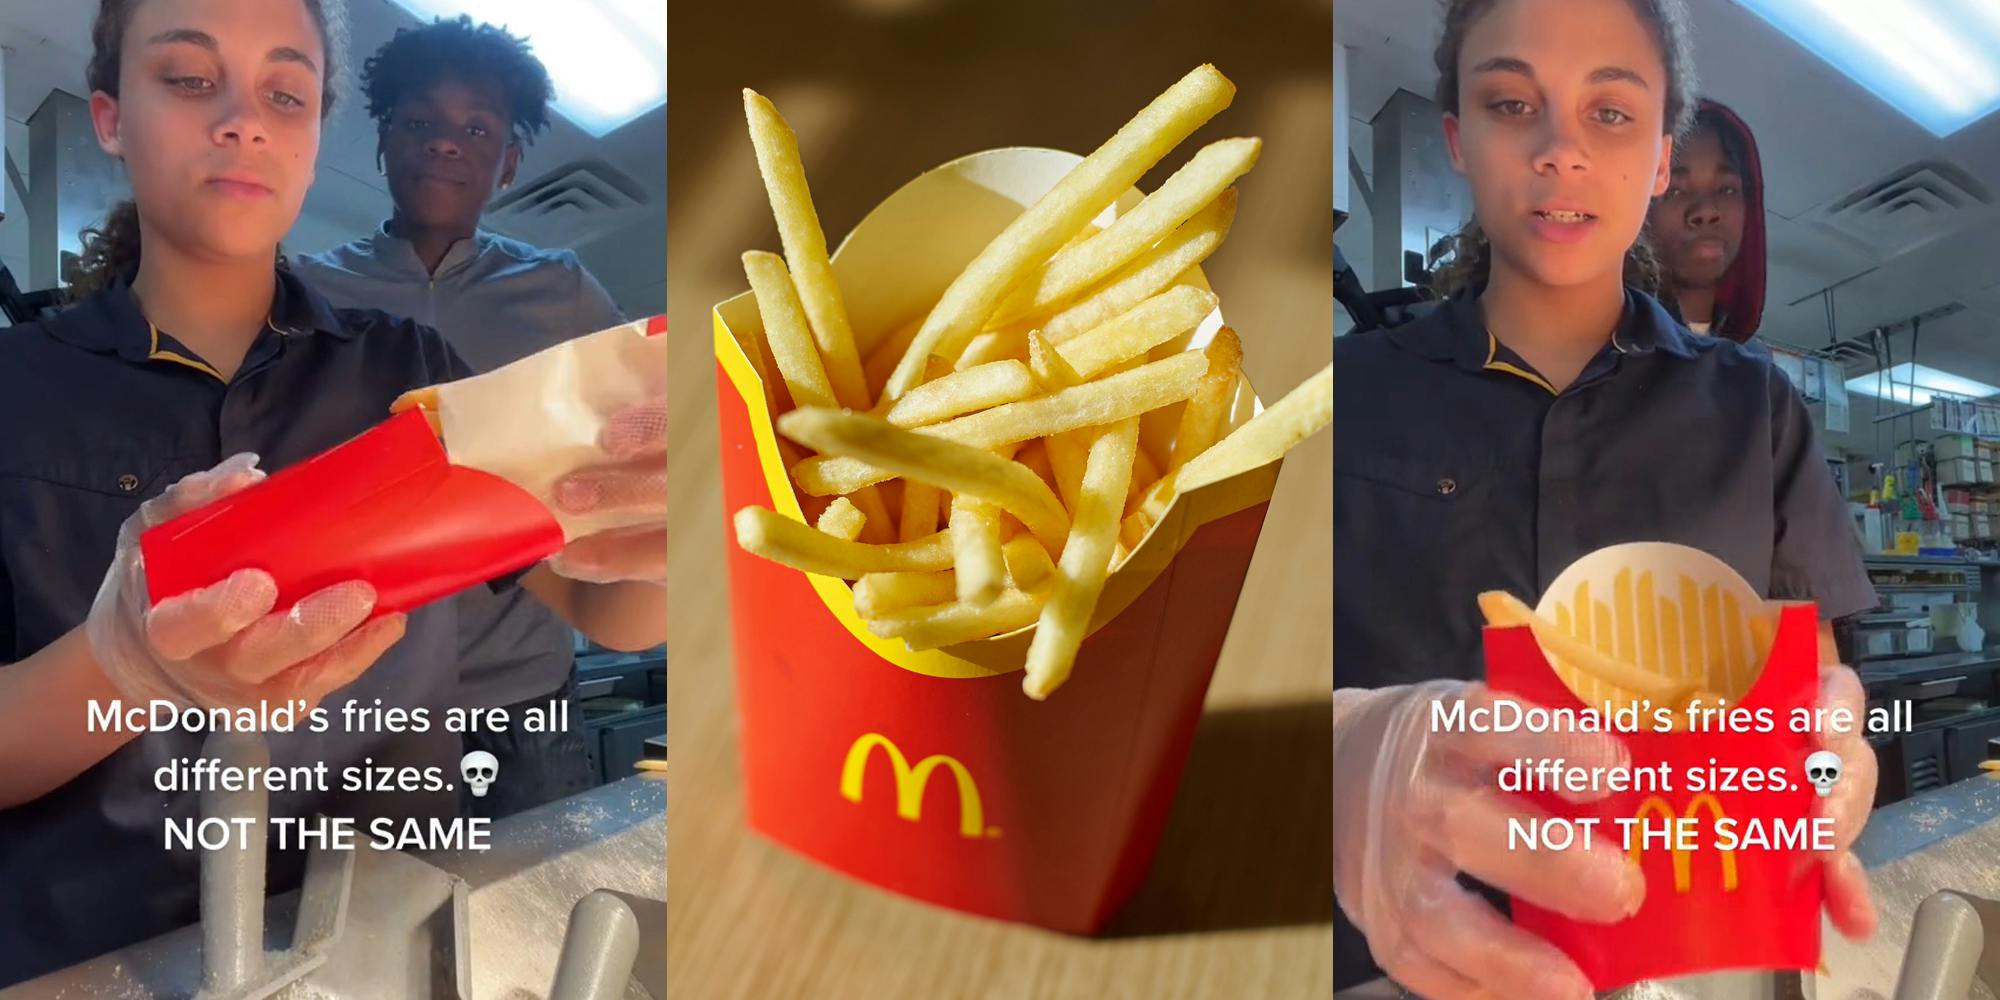 McDonald's employee pouring small fries into medium with caption "McDonald's fries are all different sizes. NOT THE SAME" (l) McDonald's fries in container on wooden surface (c) McDonald's employee holding medium fries container with small amount of fries inside with caption "McDonald's fries are all different sizes. NOT THE SAME" (r)